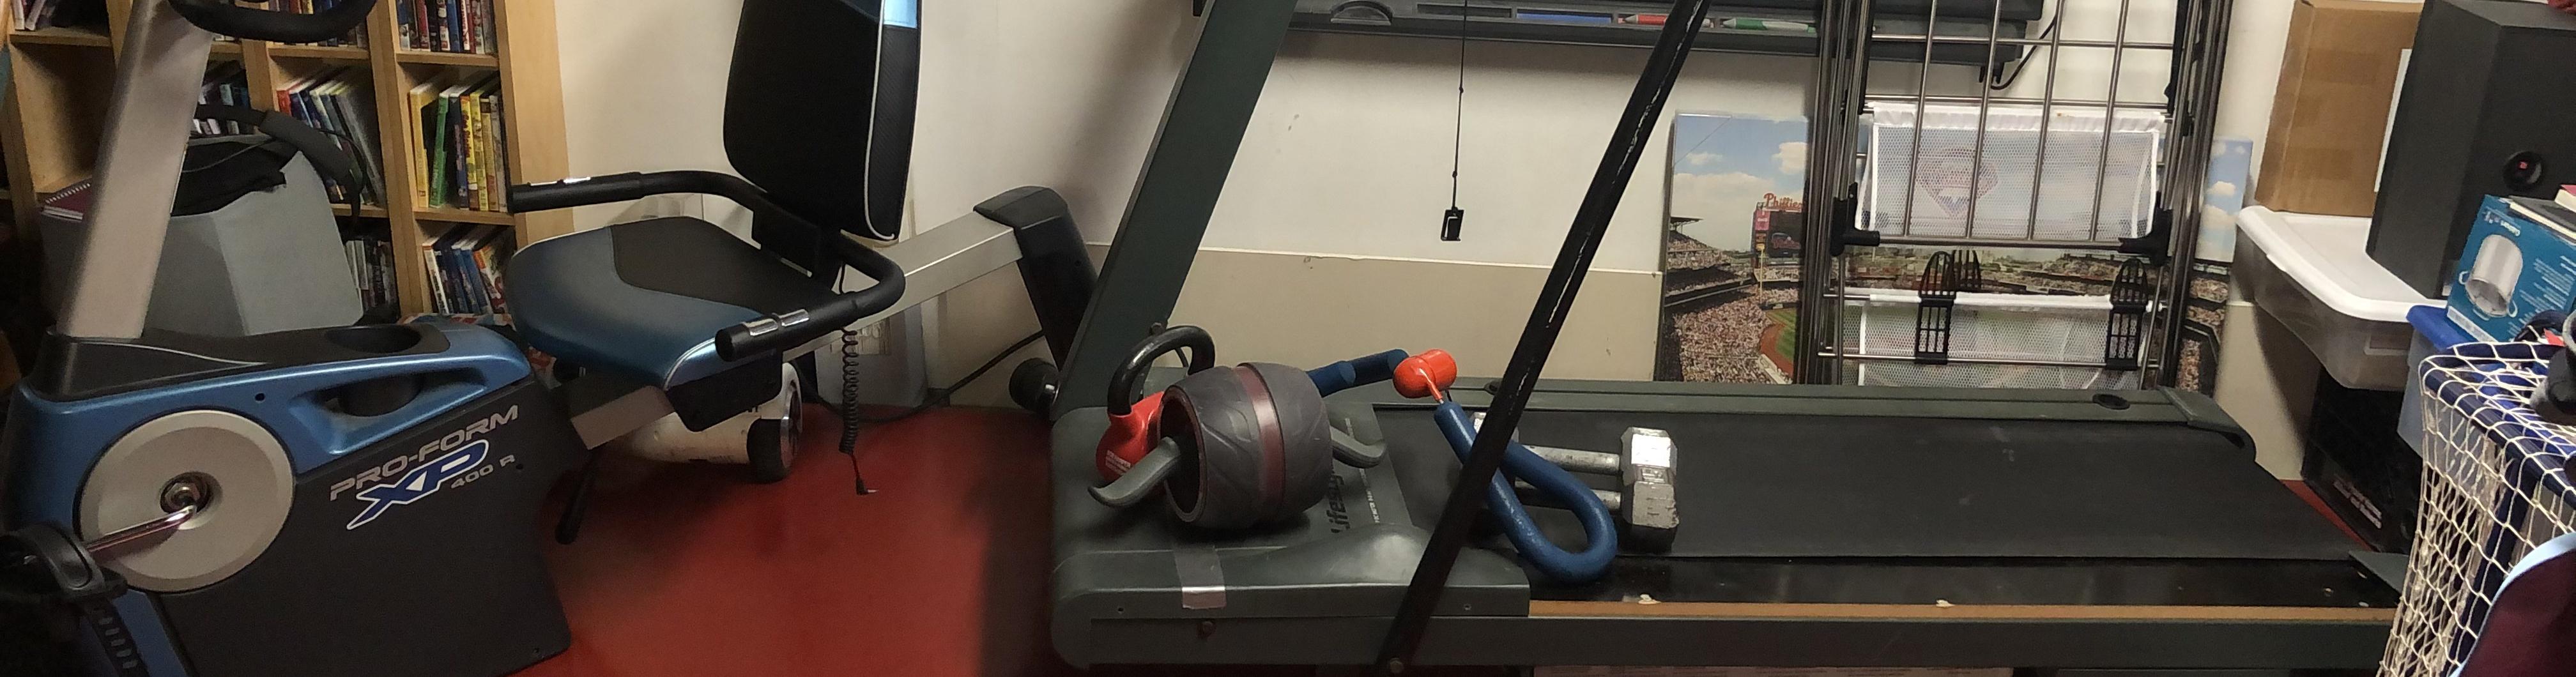 An image of exercise equipment